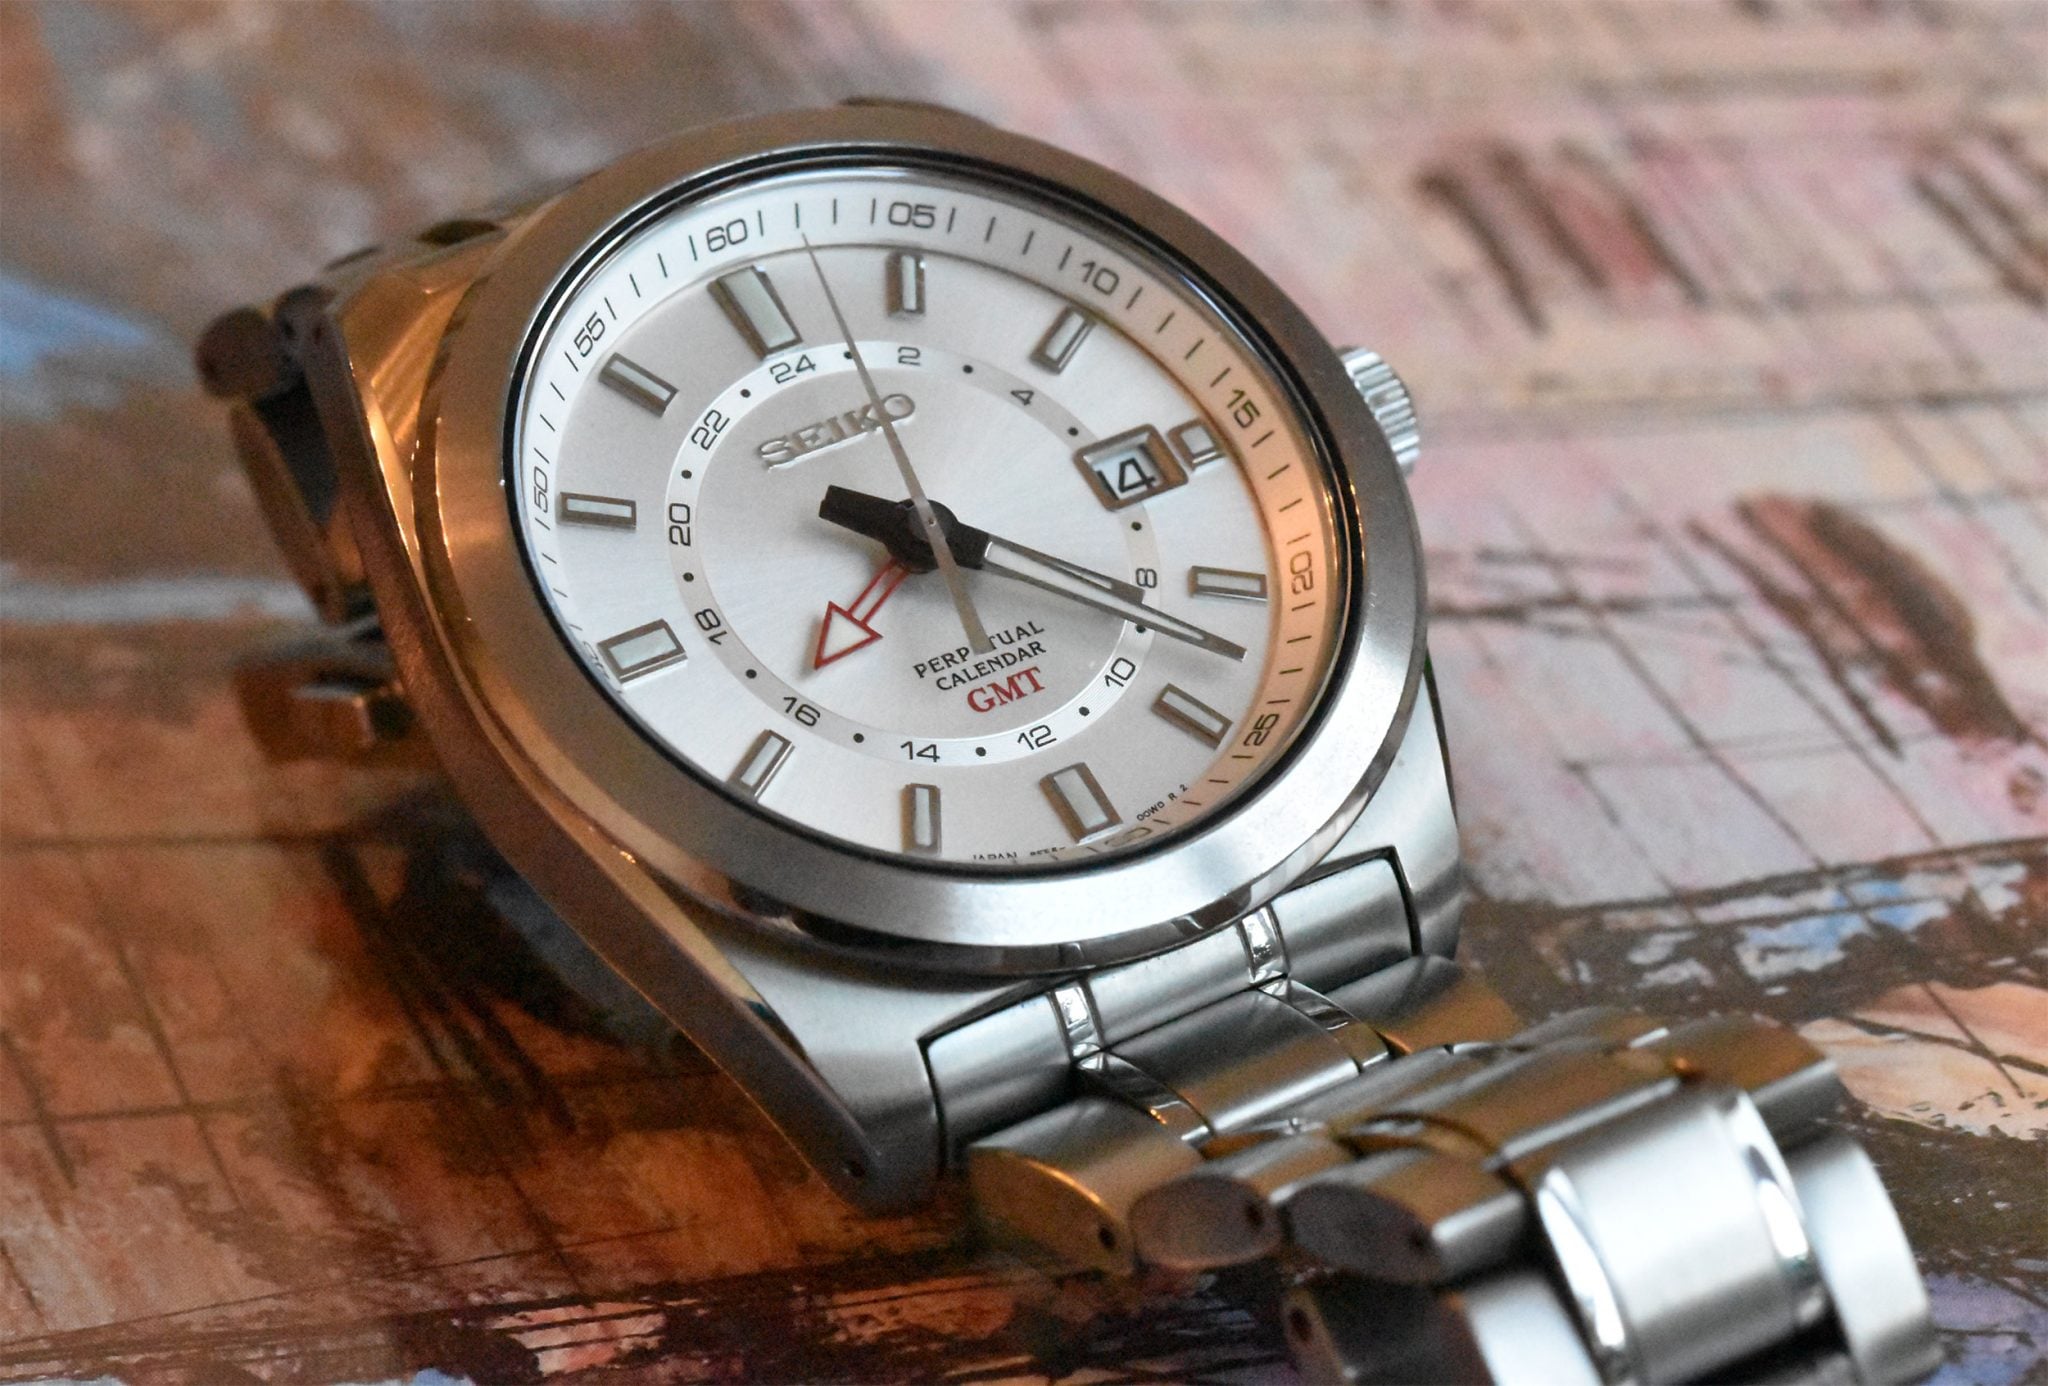 Vintage Seiko Watches: History & Iconic Models | Vintage Watch Inc